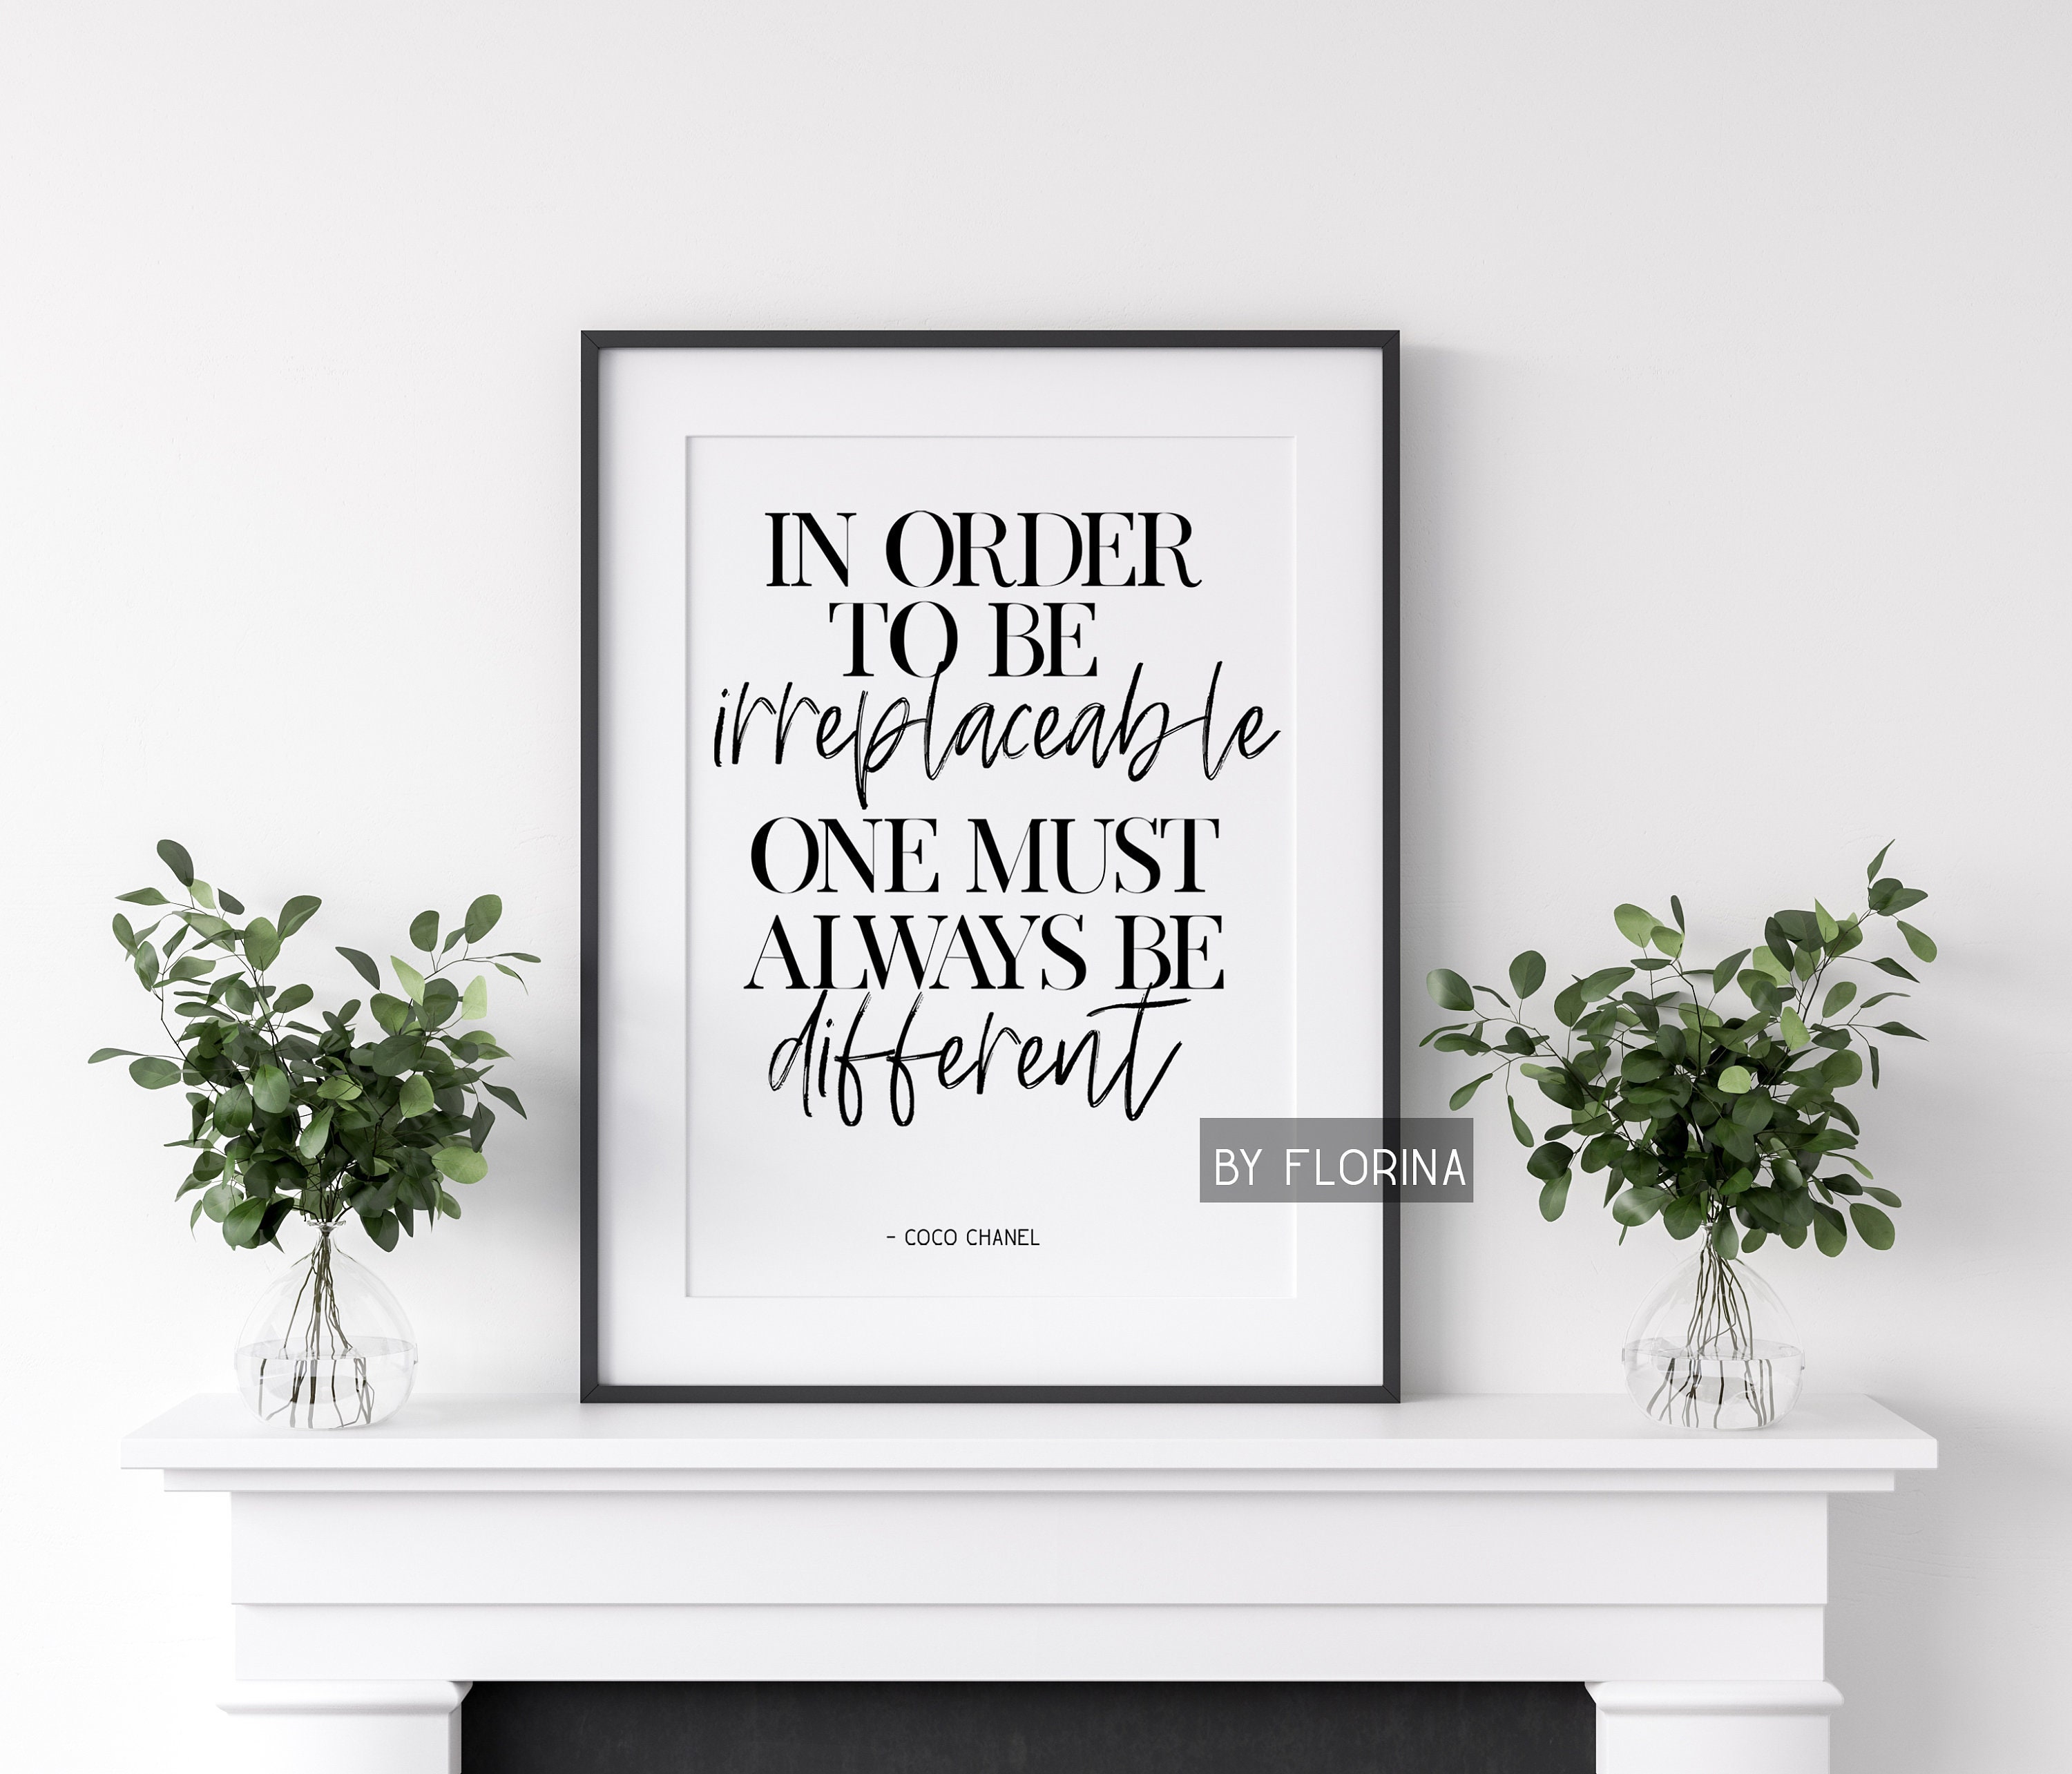 In order to be irreplaceable one must always be different. - Coco Chanel